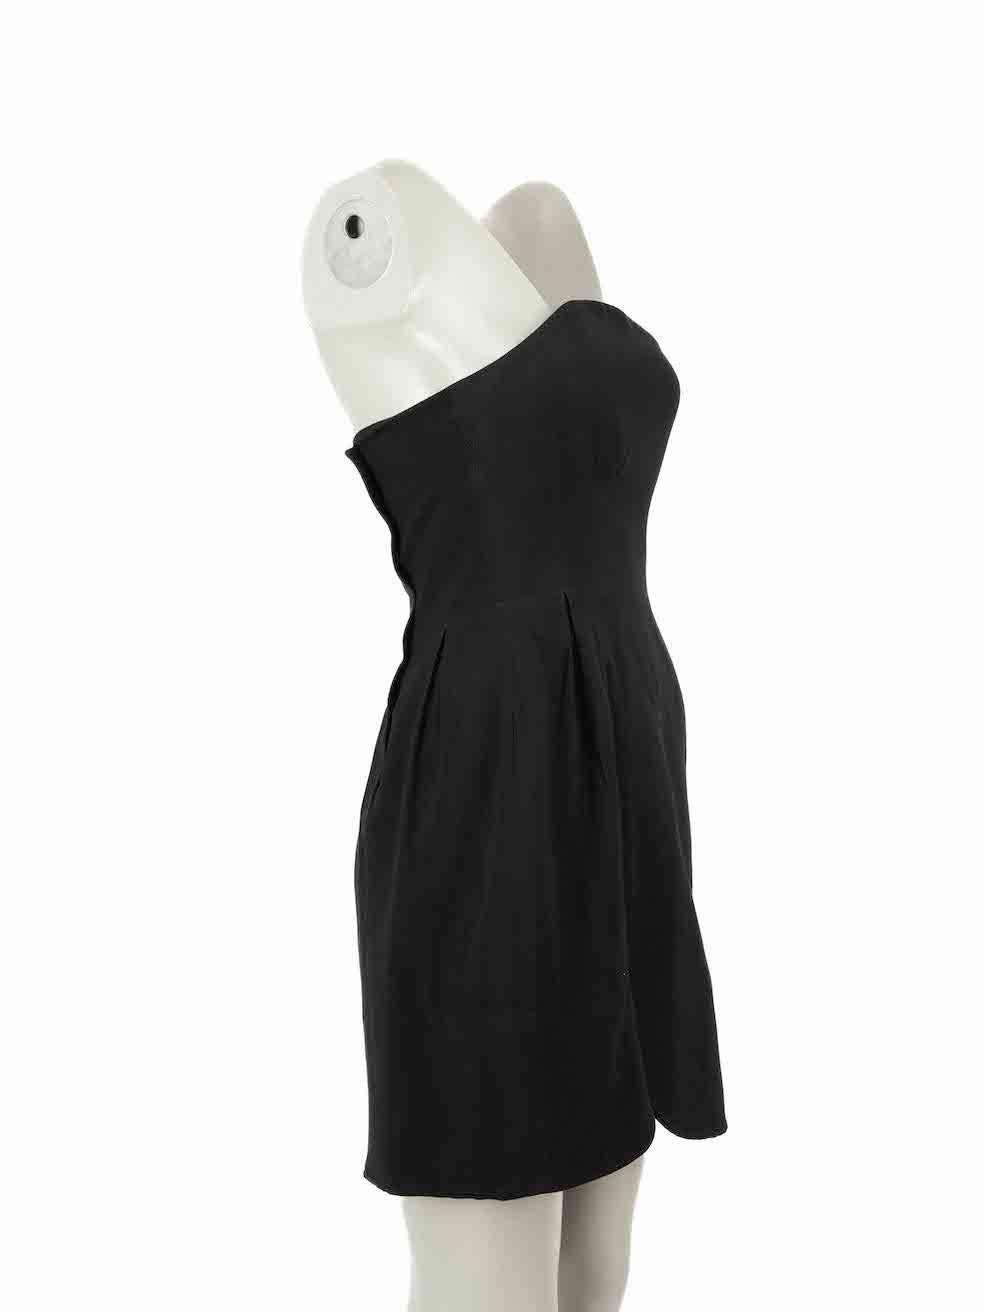 CONDITION is Very good. Minimal wear to dress is evident. Minimal wear to the front and back with very light marks on this used Miu Miu designer resale item.
 
Details
Black
Synthetic
Dress
Strapless
Mini
Asymmetric sweetheart neckline 
Back zip and